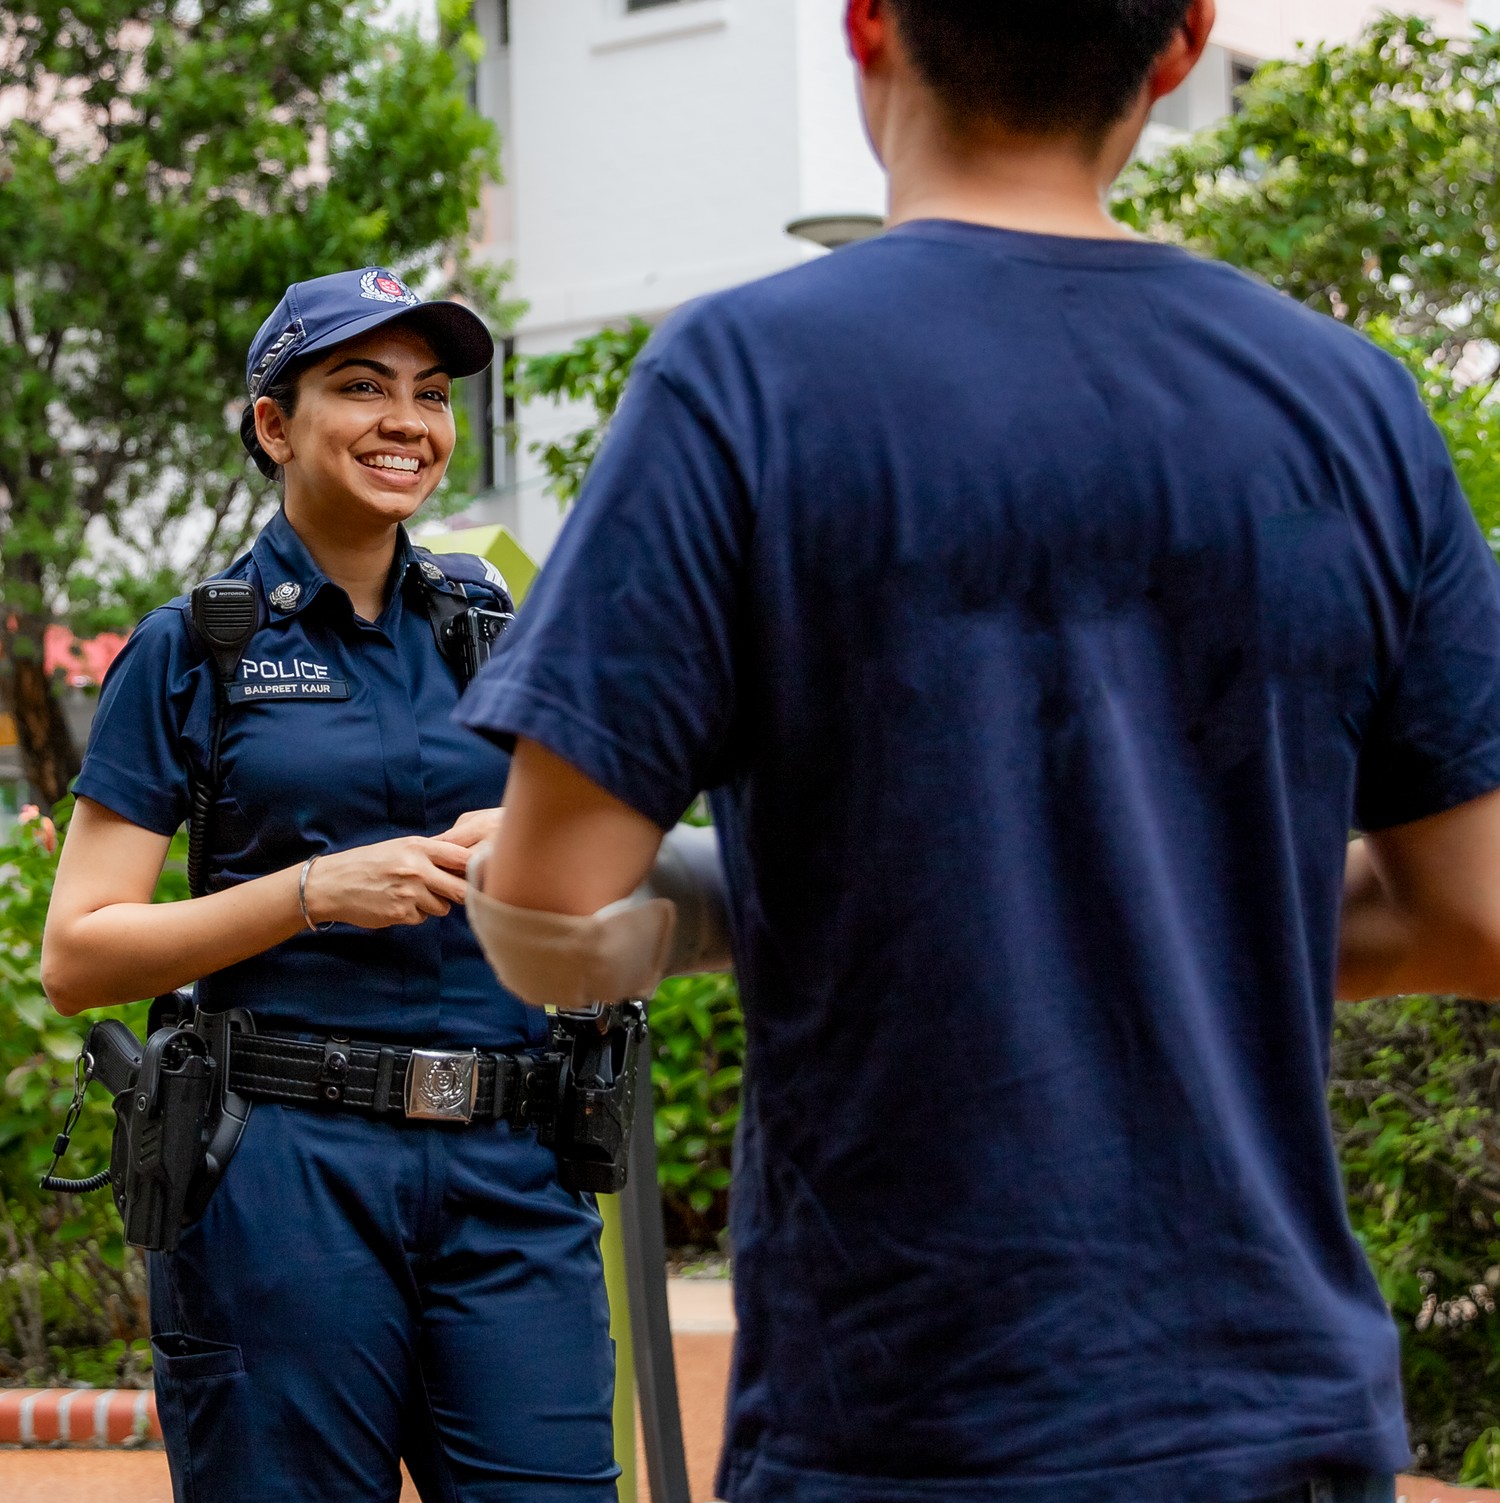 female officer in uniform speaking to a member of public, who is wearing a navy blue t-shirt